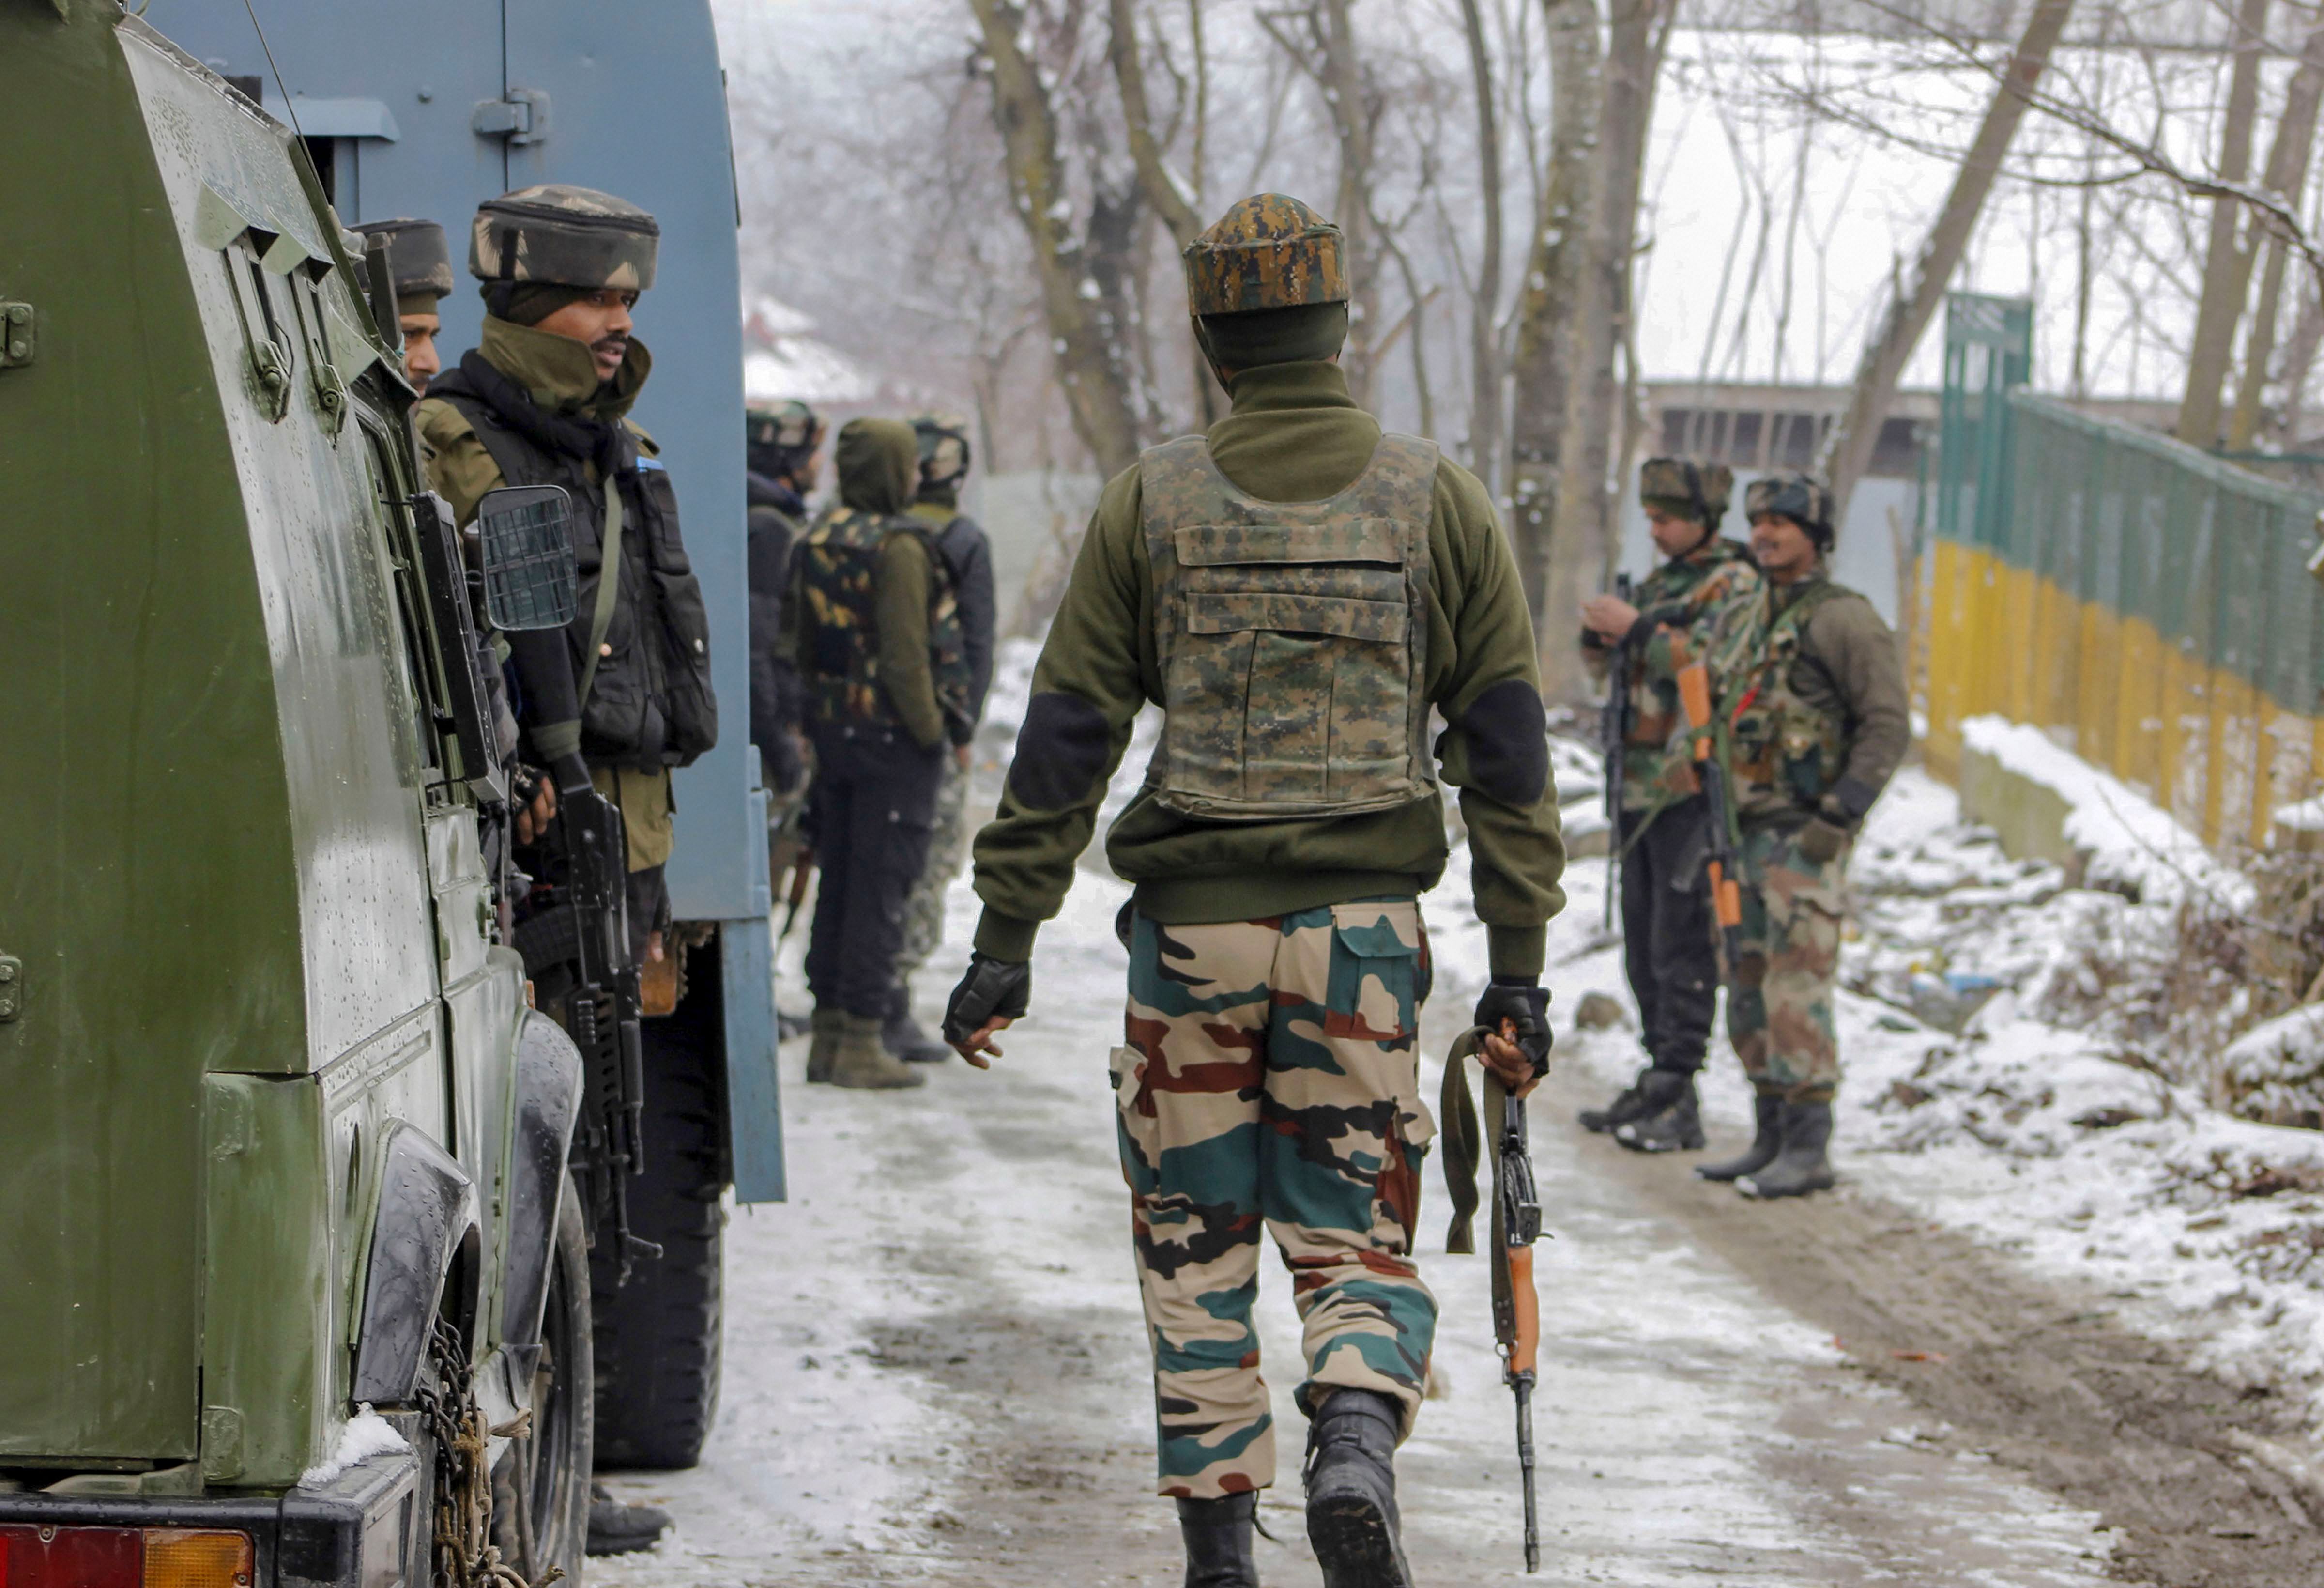 The Hizbul Mujahideen was a dominant force in Kashmir after the militancy broke out in the valley. Credit: PTI Photo